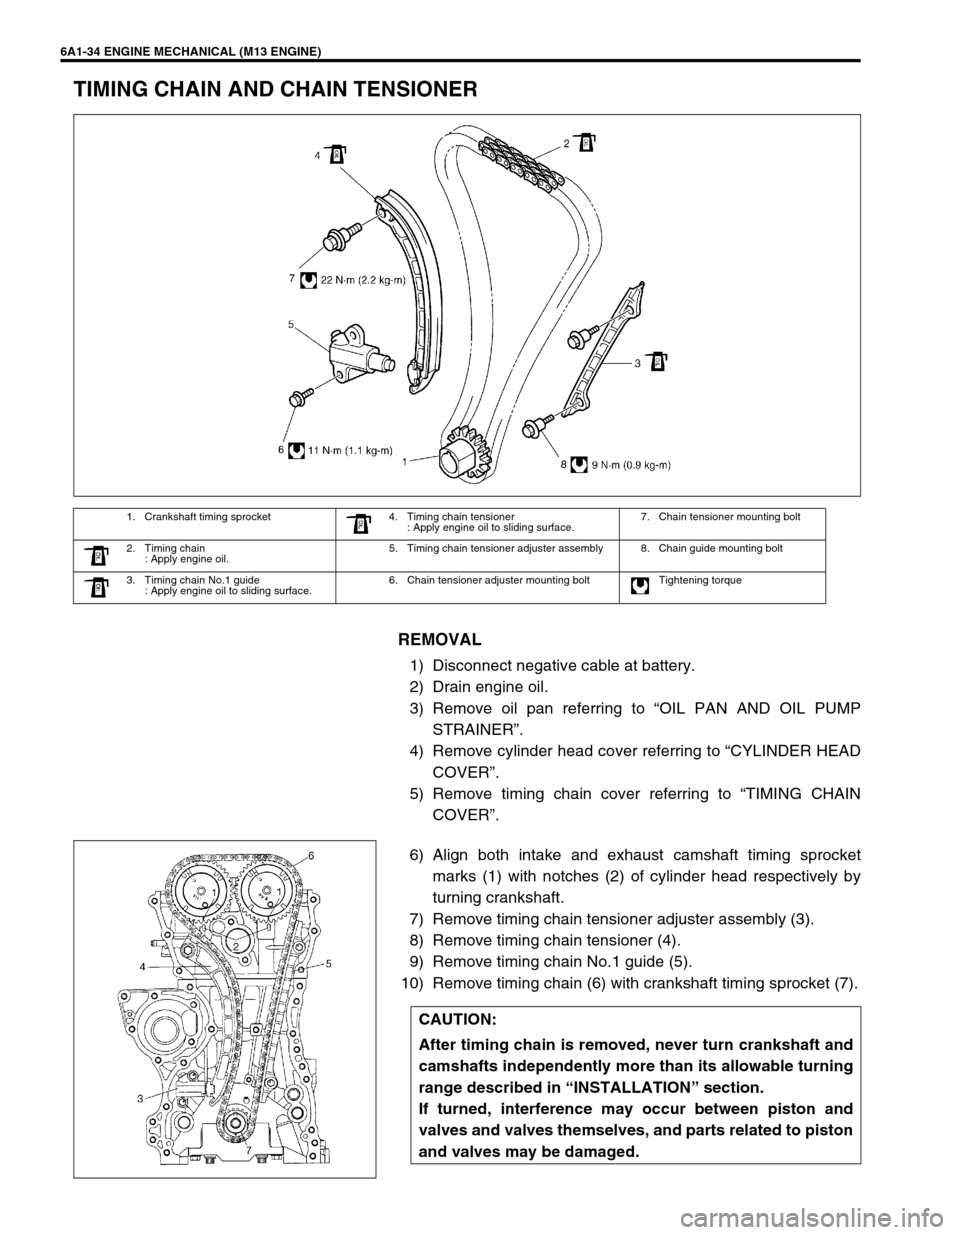 SUZUKI SWIFT 2000 1.G RG413 Service Workshop Manual 6A1-34 ENGINE MECHANICAL (M13 ENGINE)
TIMING CHAIN AND CHAIN TENSIONER
REMOVAL
1) Disconnect negative cable at battery.
2) Drain engine oil.
3) Remove oil pan referring to “OIL PAN AND OIL PUMP
STRA